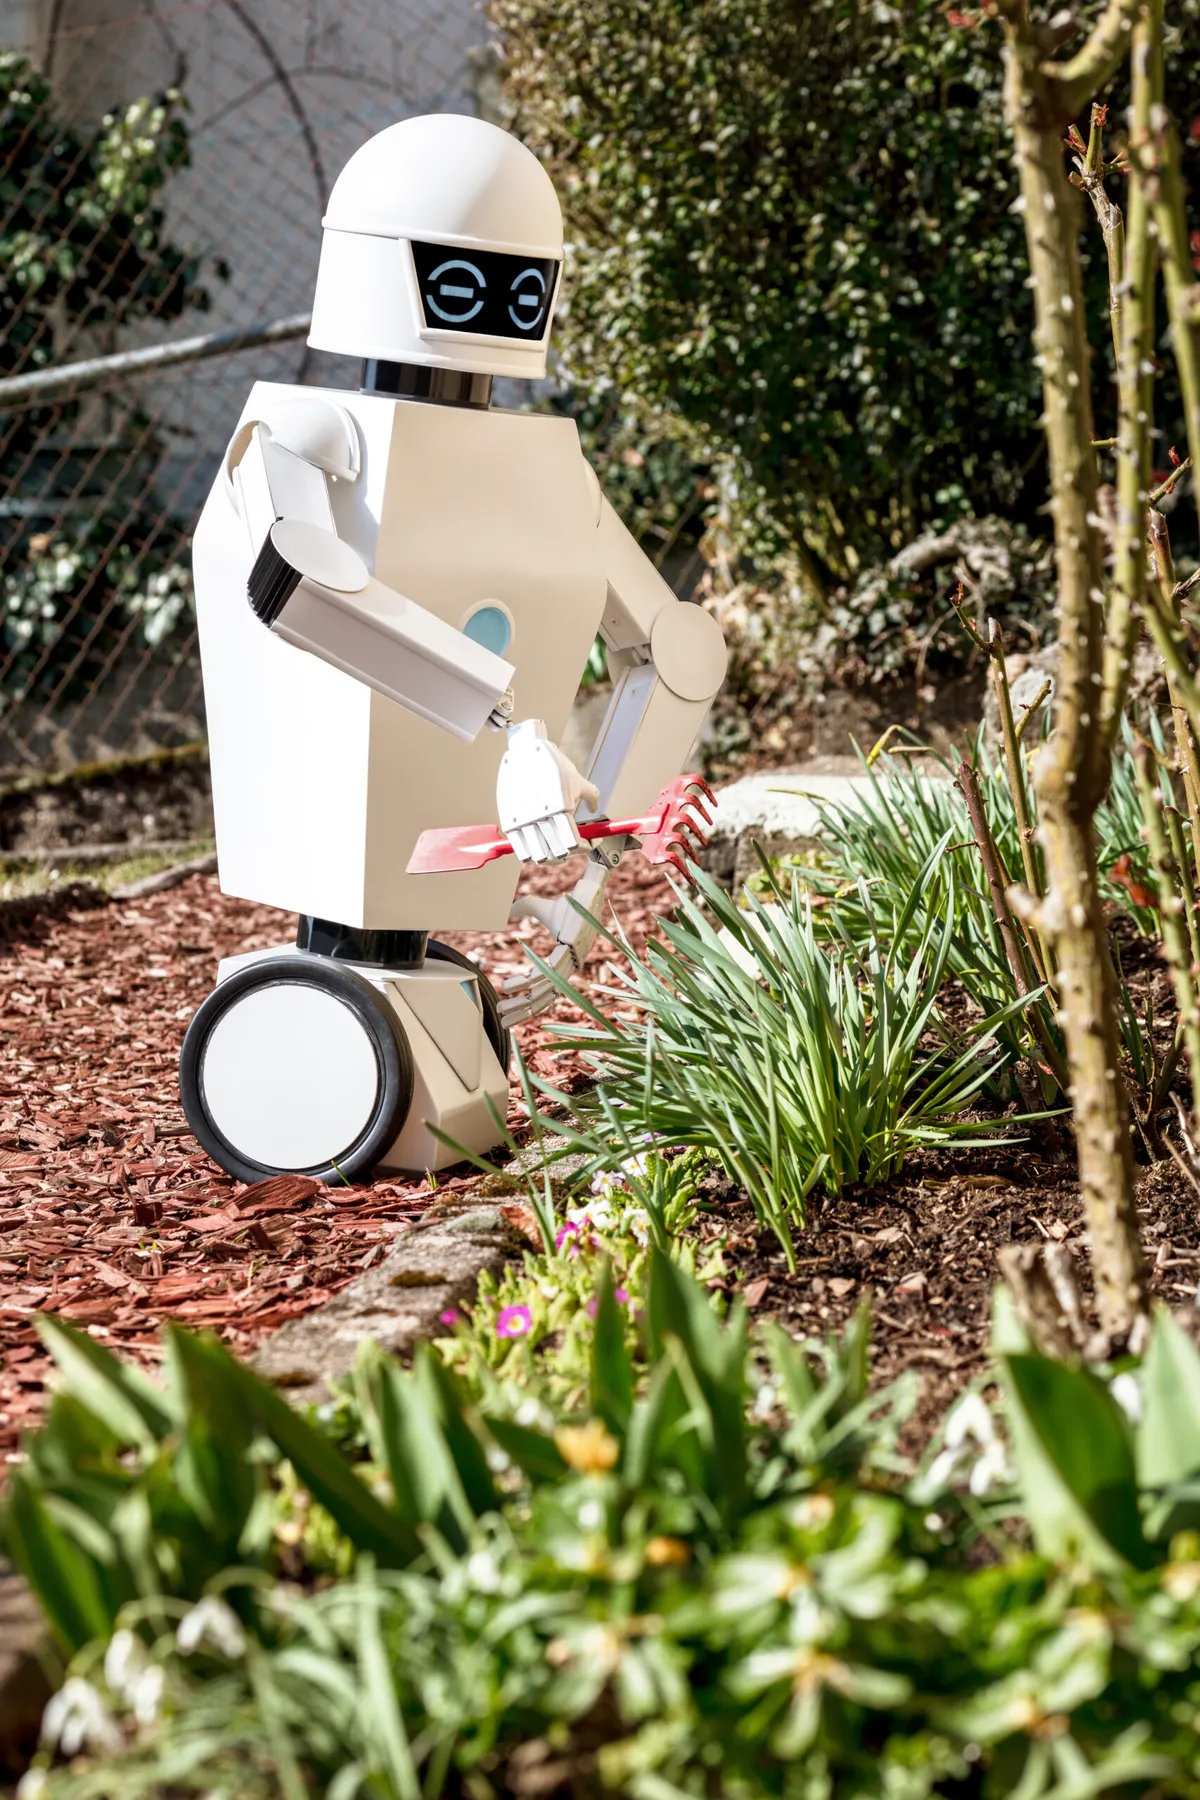 Service robot is gardening with a garden tool by sunlight © Getty